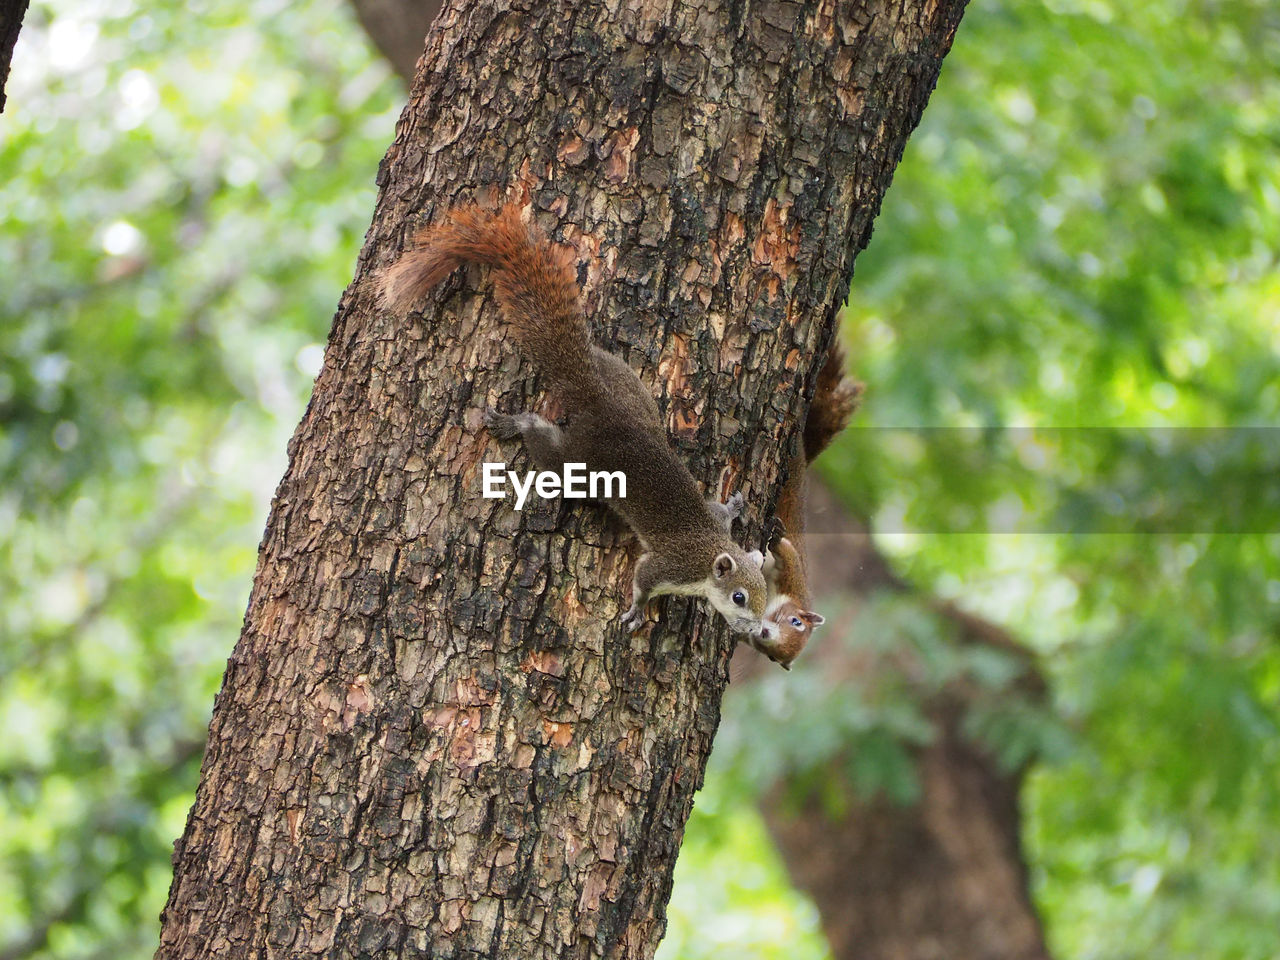 VIEW OF SQUIRREL ON TREE TRUNK